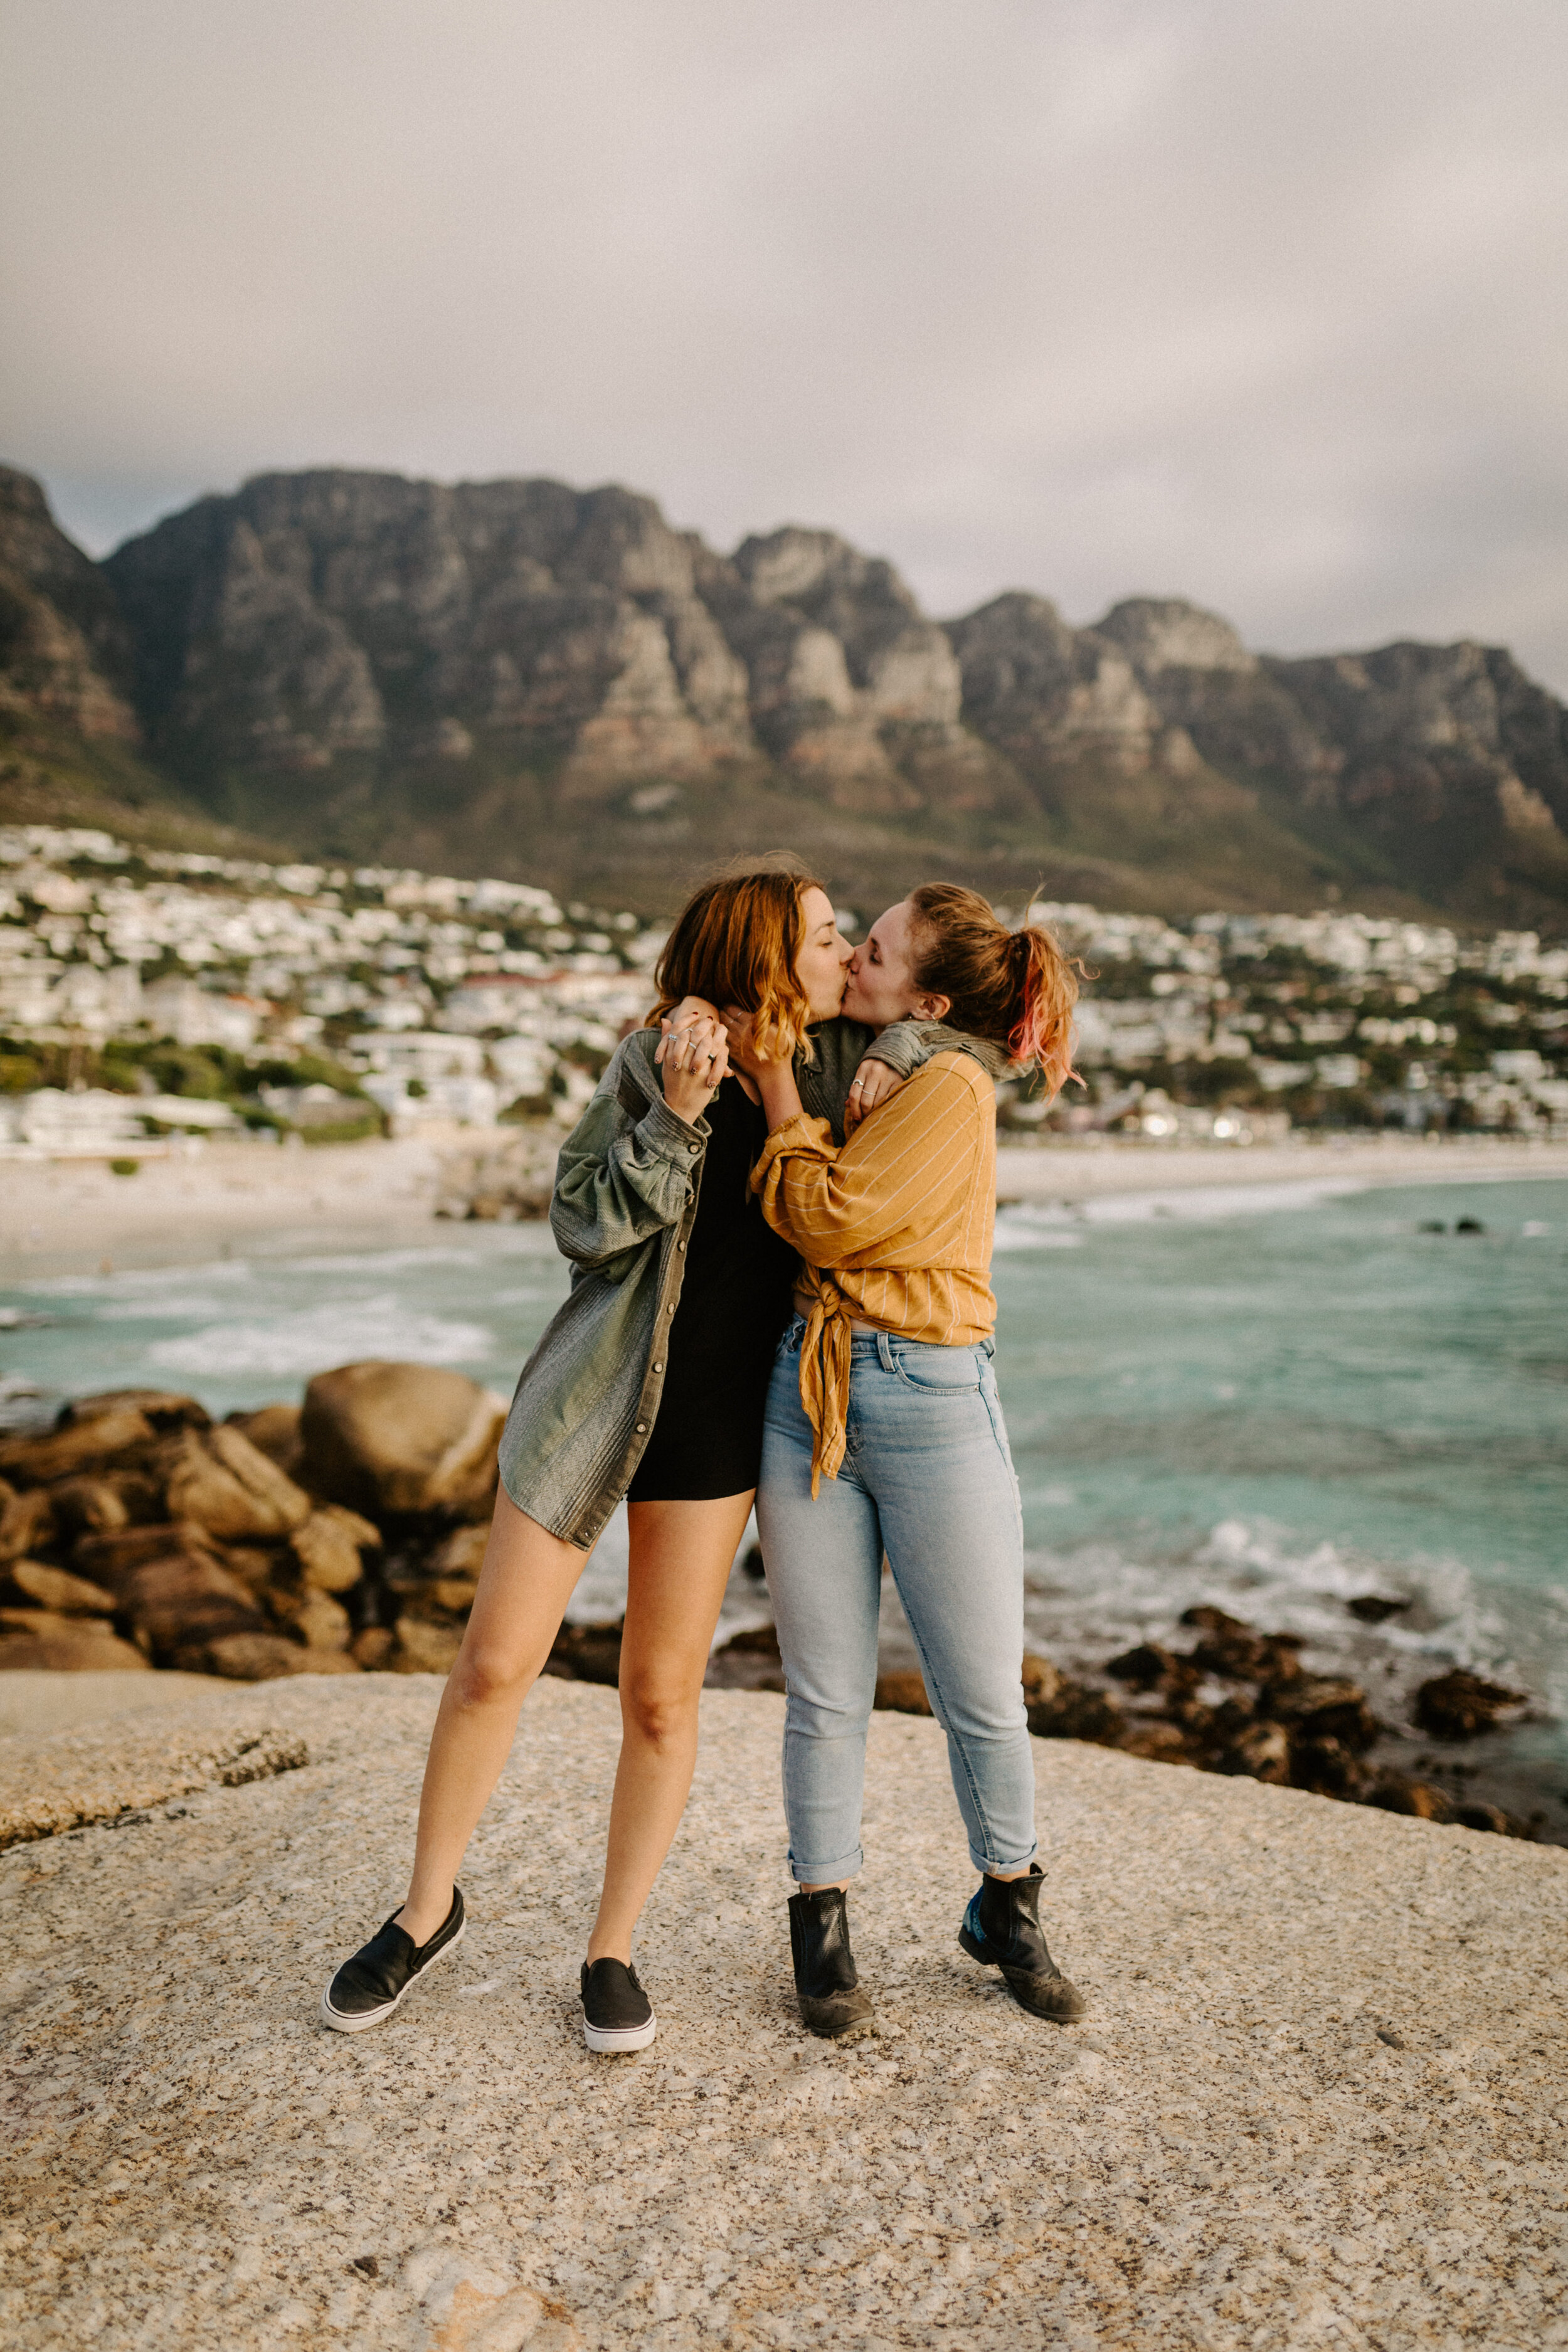 Top gay dating apps in Cape Town